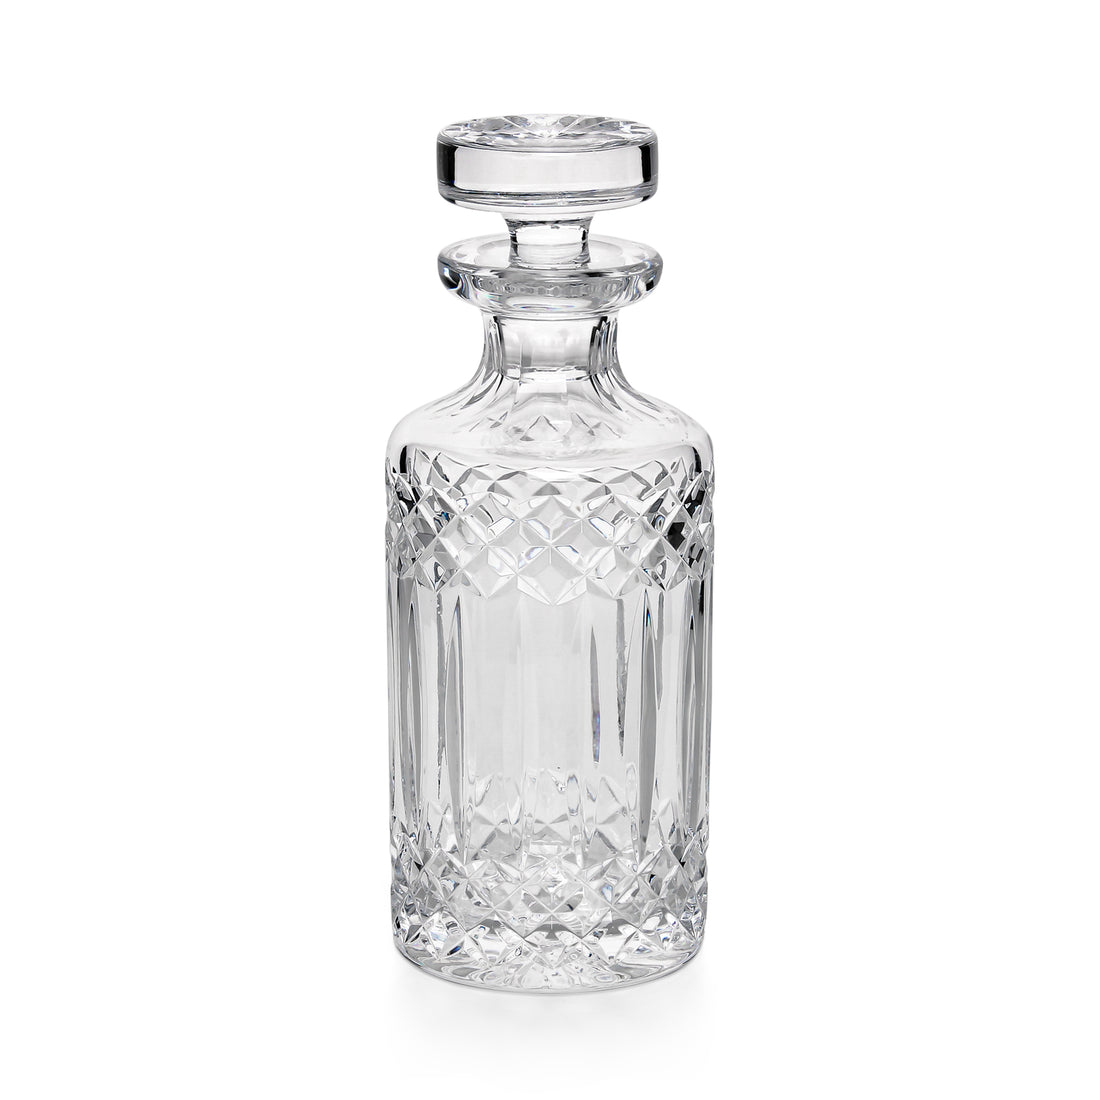 WATERFORD Crystal Spirits Decanter